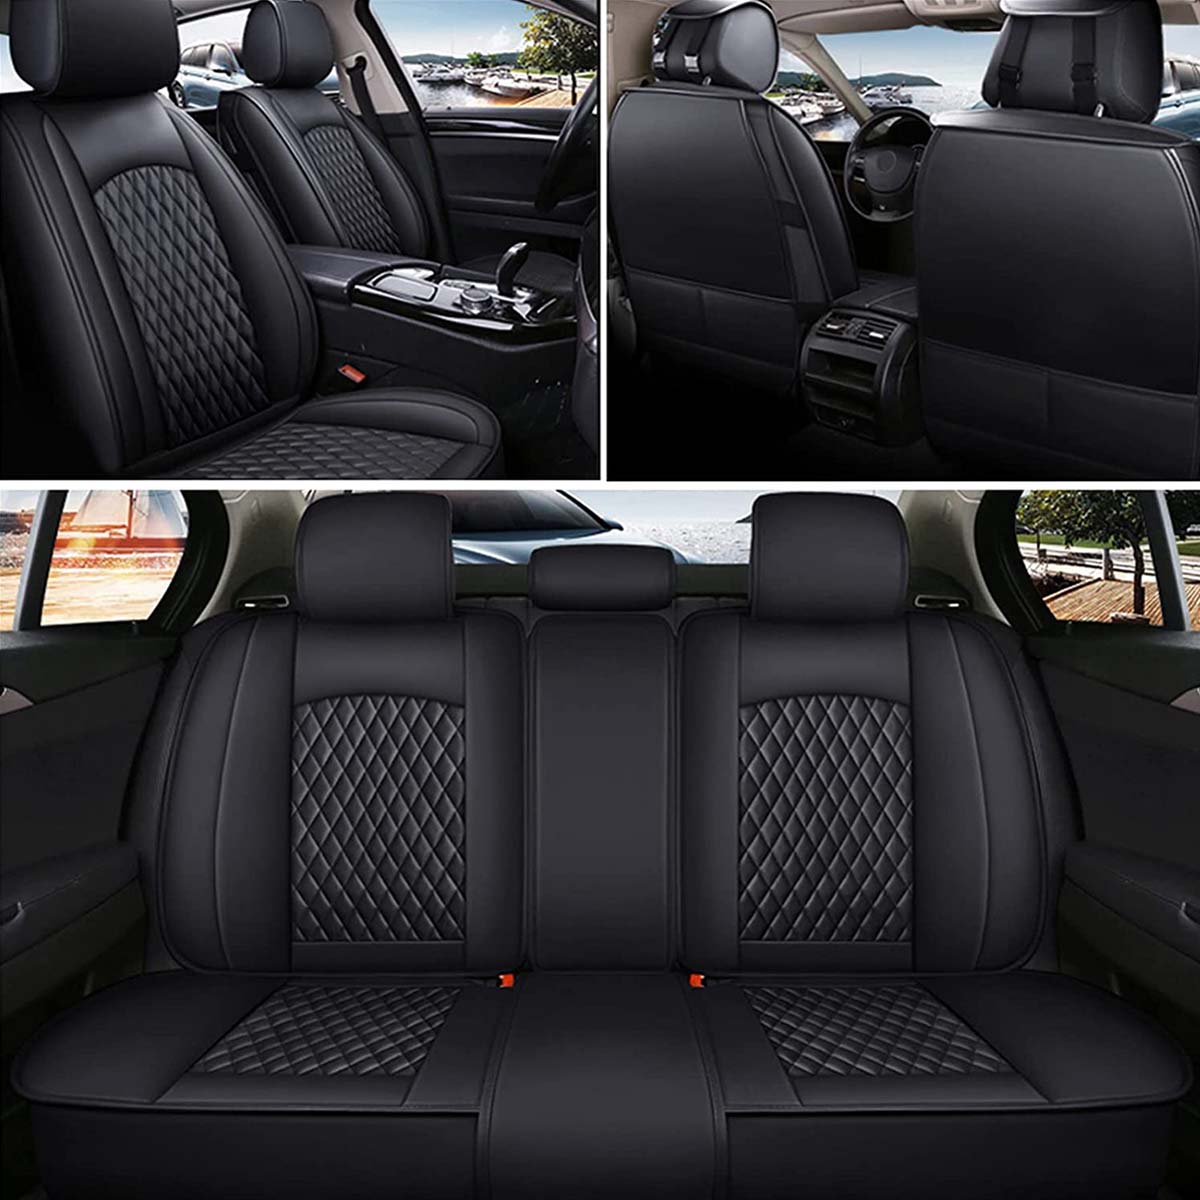 Delicate Leather Car Seat Covers Full Set, Custom For All Cars, Waterproof Leather Front Rear Seat Automotive Protection Cushions